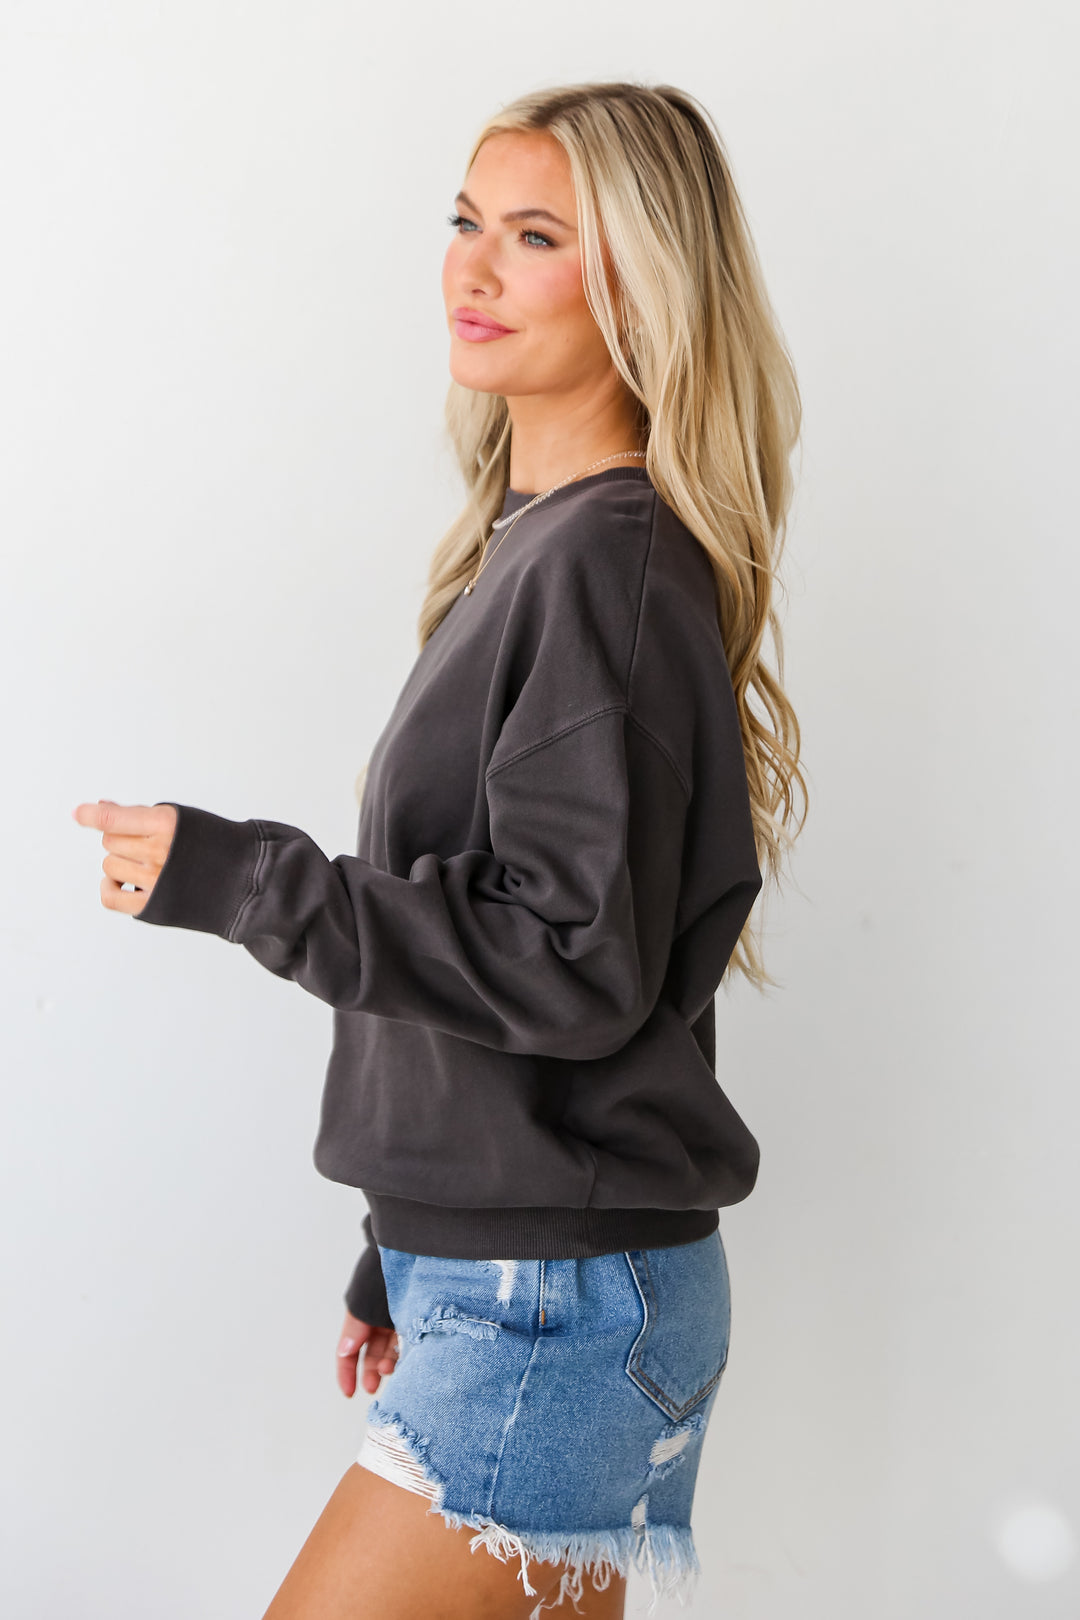 womens Oversized Pullovers